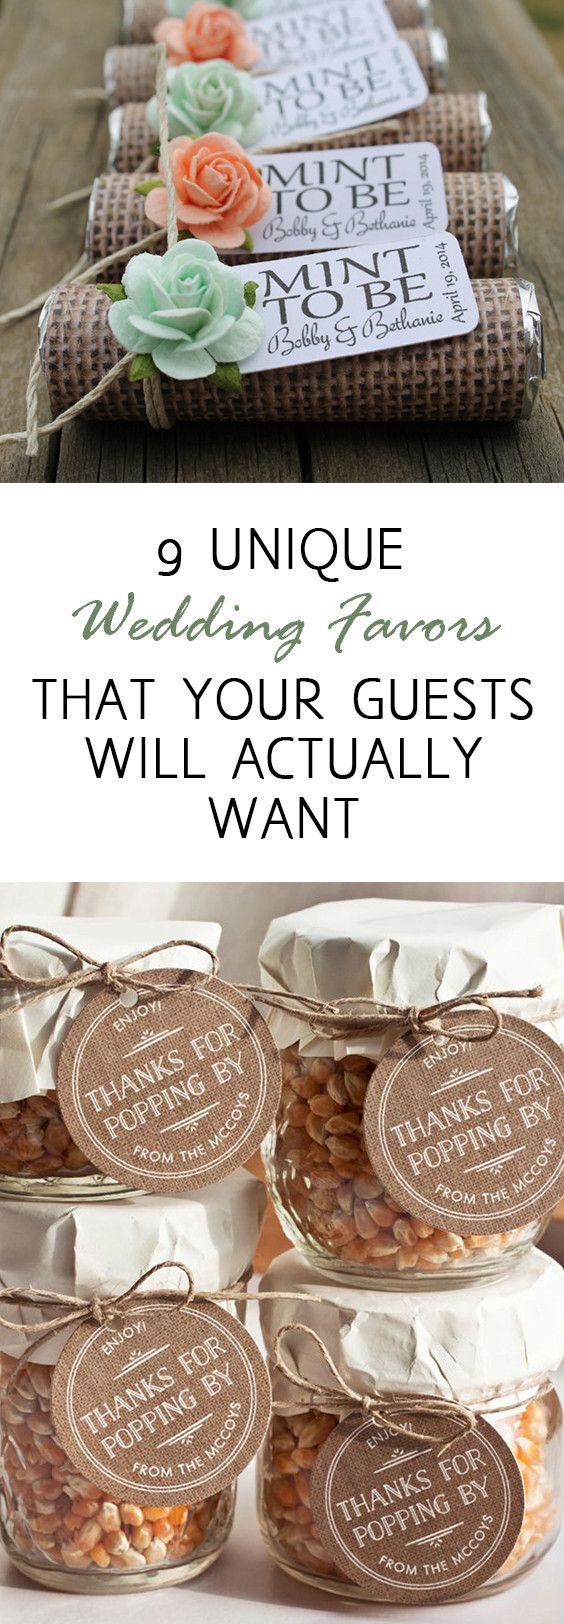 Diy Wedding Favors Pinterest
 9 Unique Wedding Favors that Your Guests Will Actually